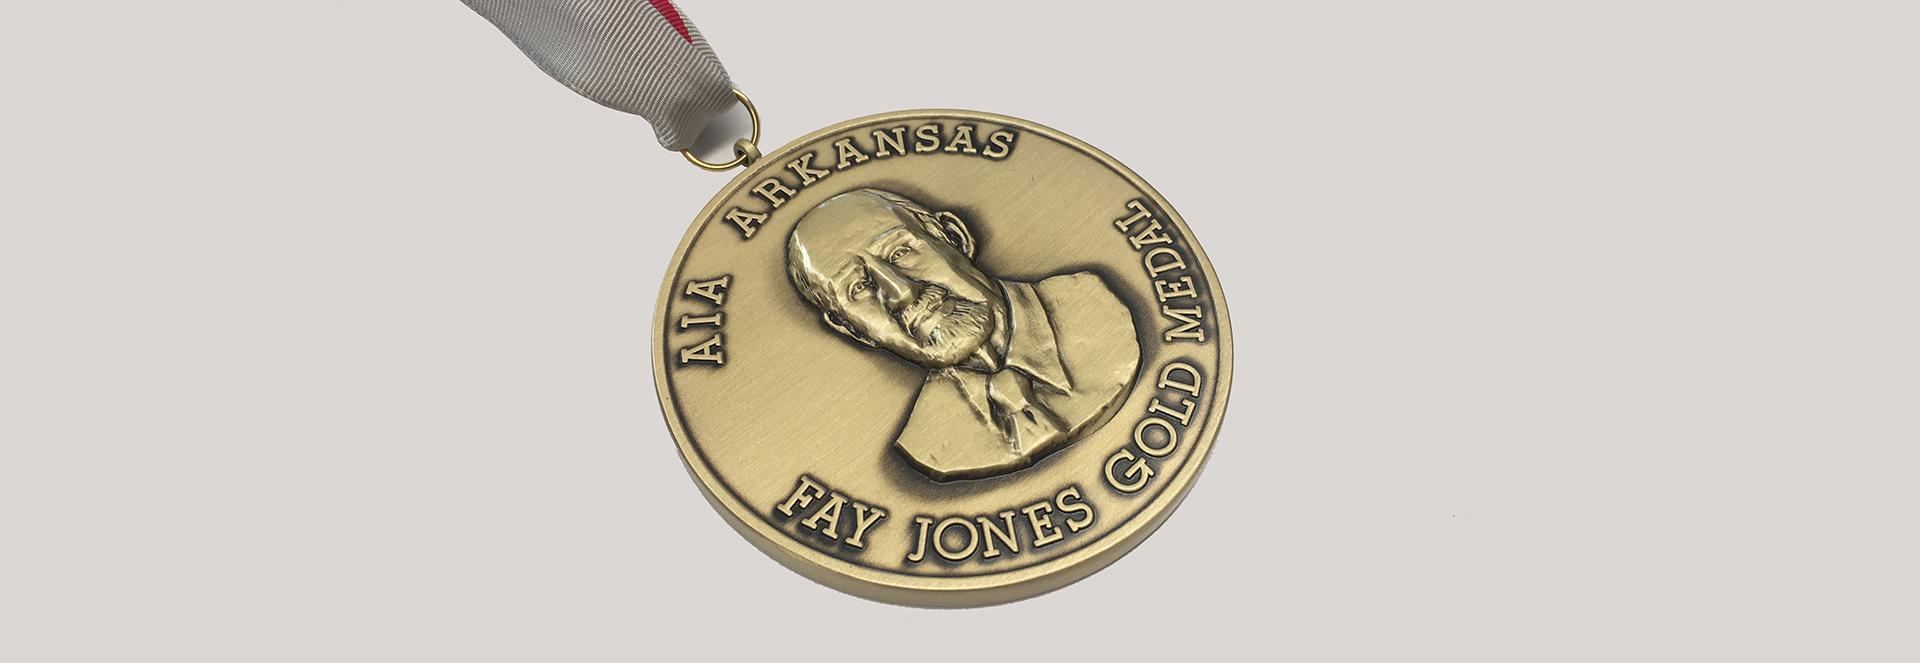 Cover image for Arkansas AIA E. Fay Jones Gold Medal in 2017